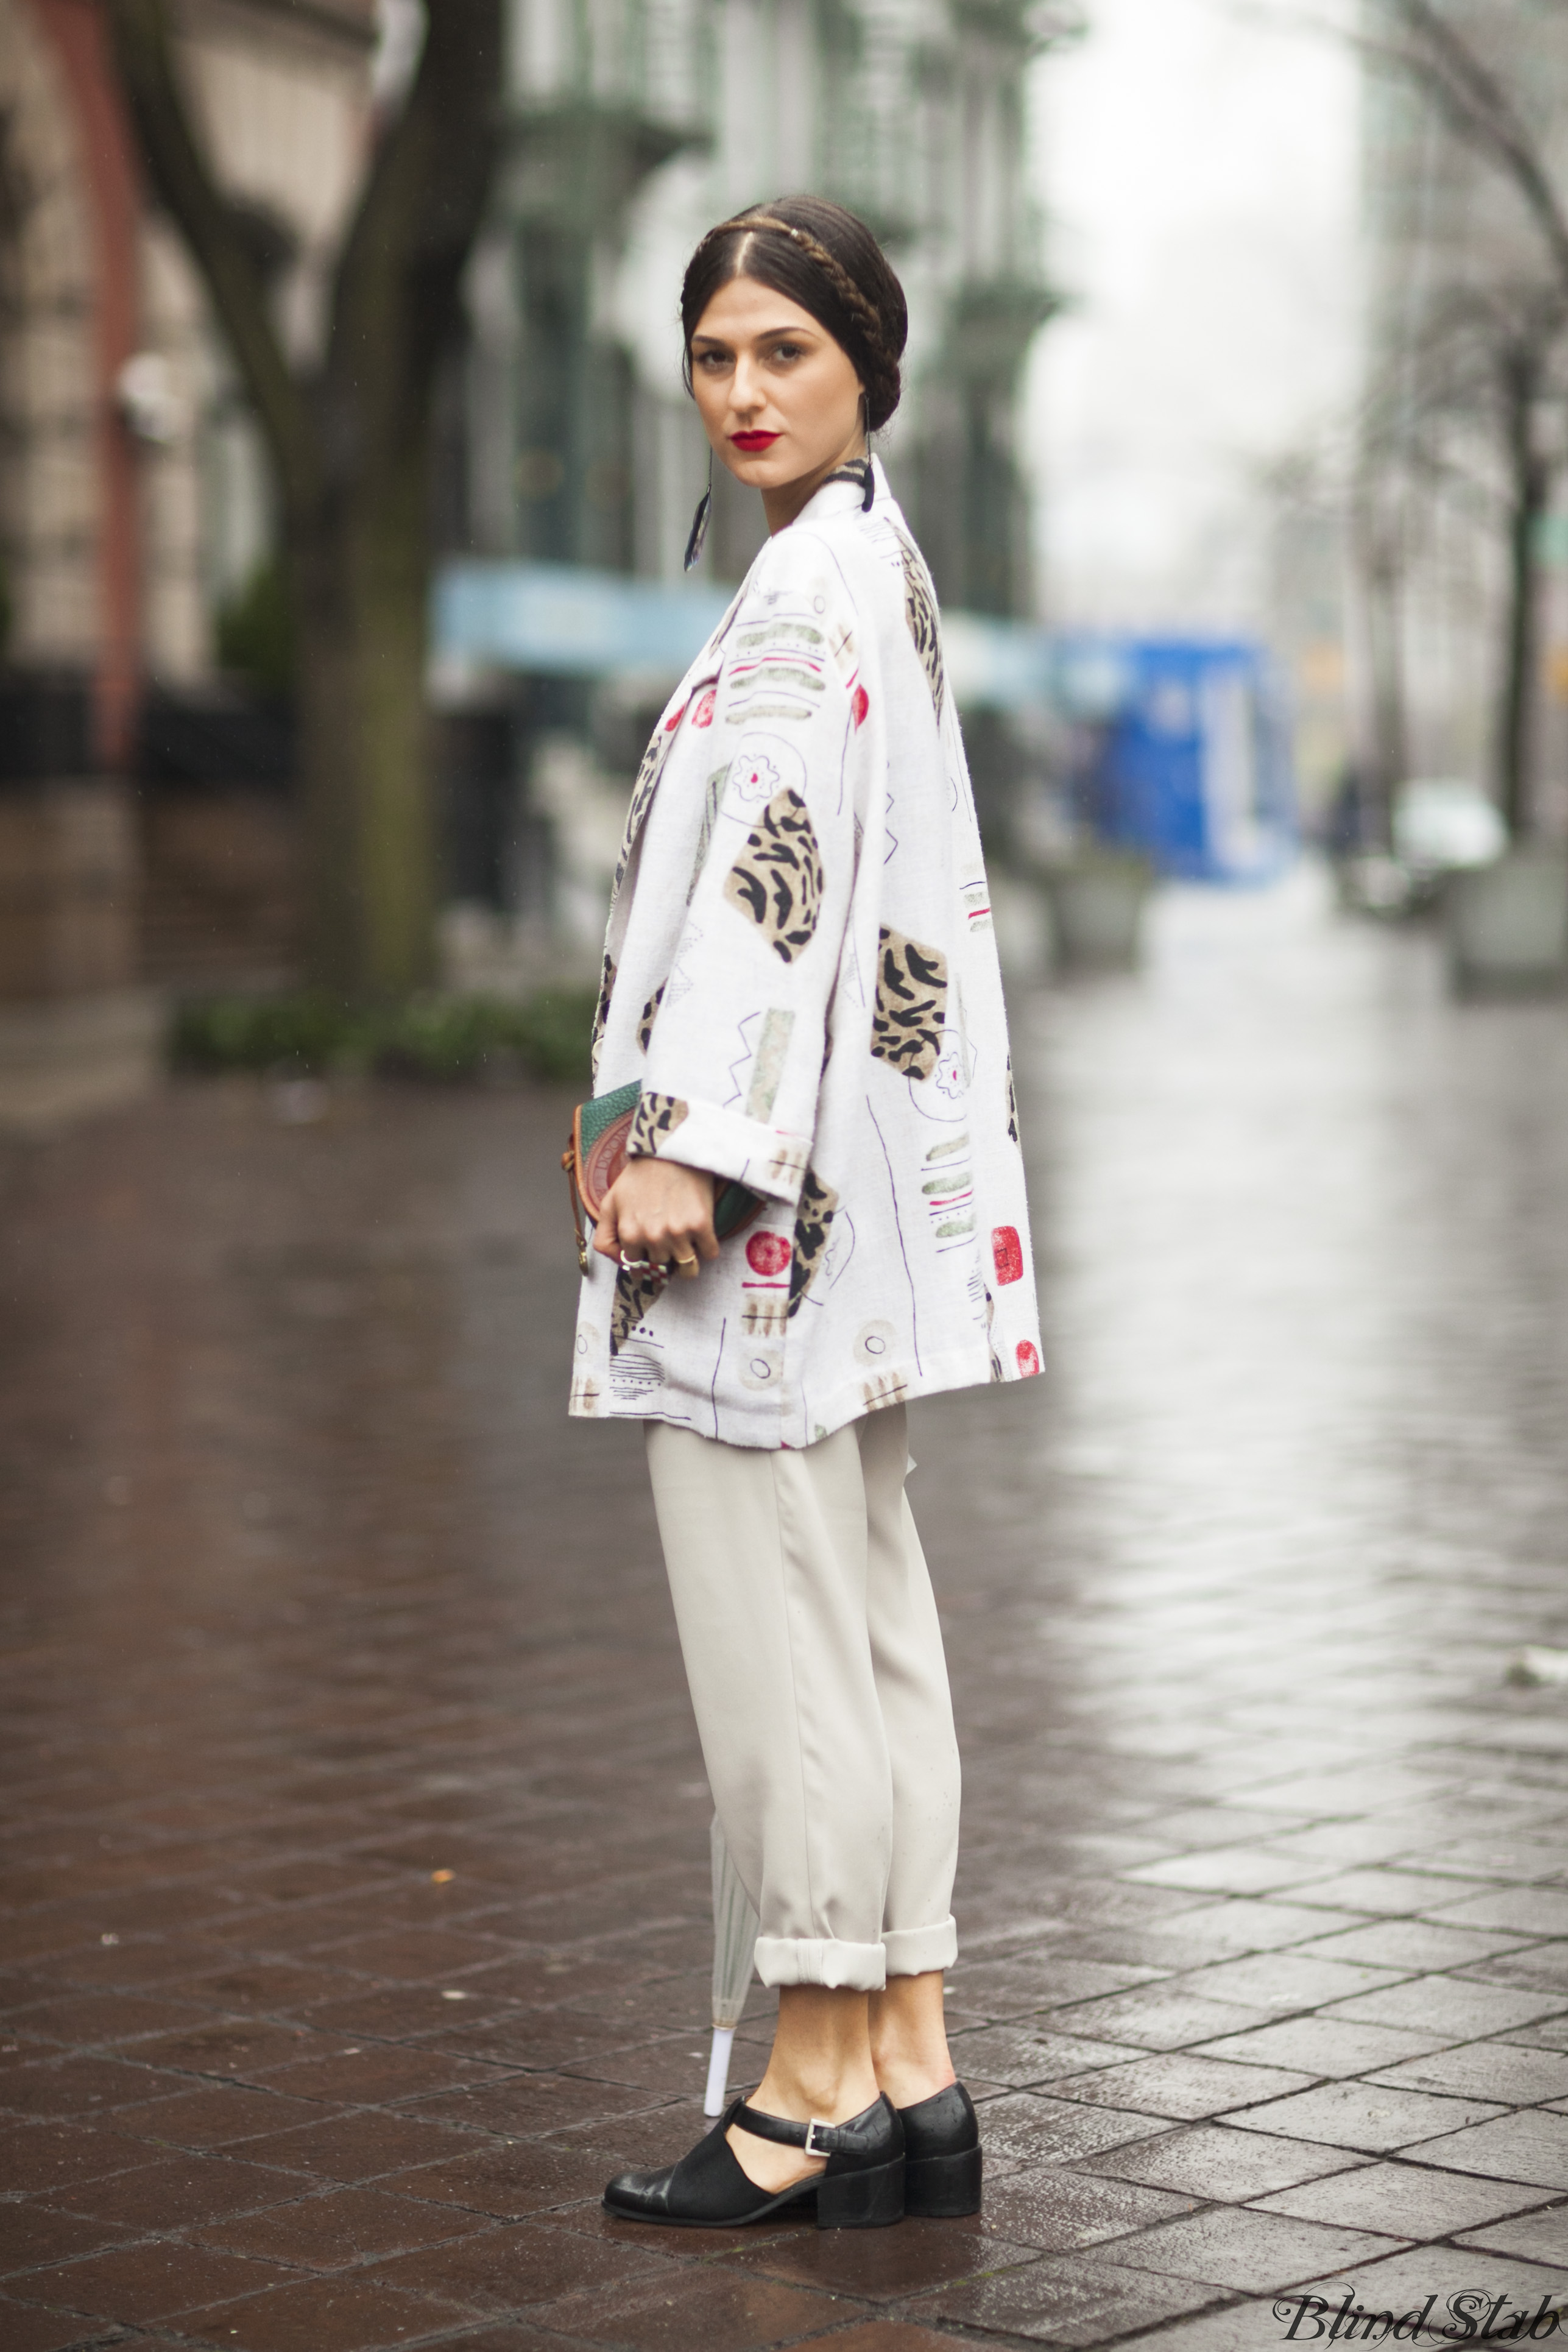 NYC-New-York-Street-Style-Streetstyle-80s-Oversize-Coat-High-Waisted-Pants